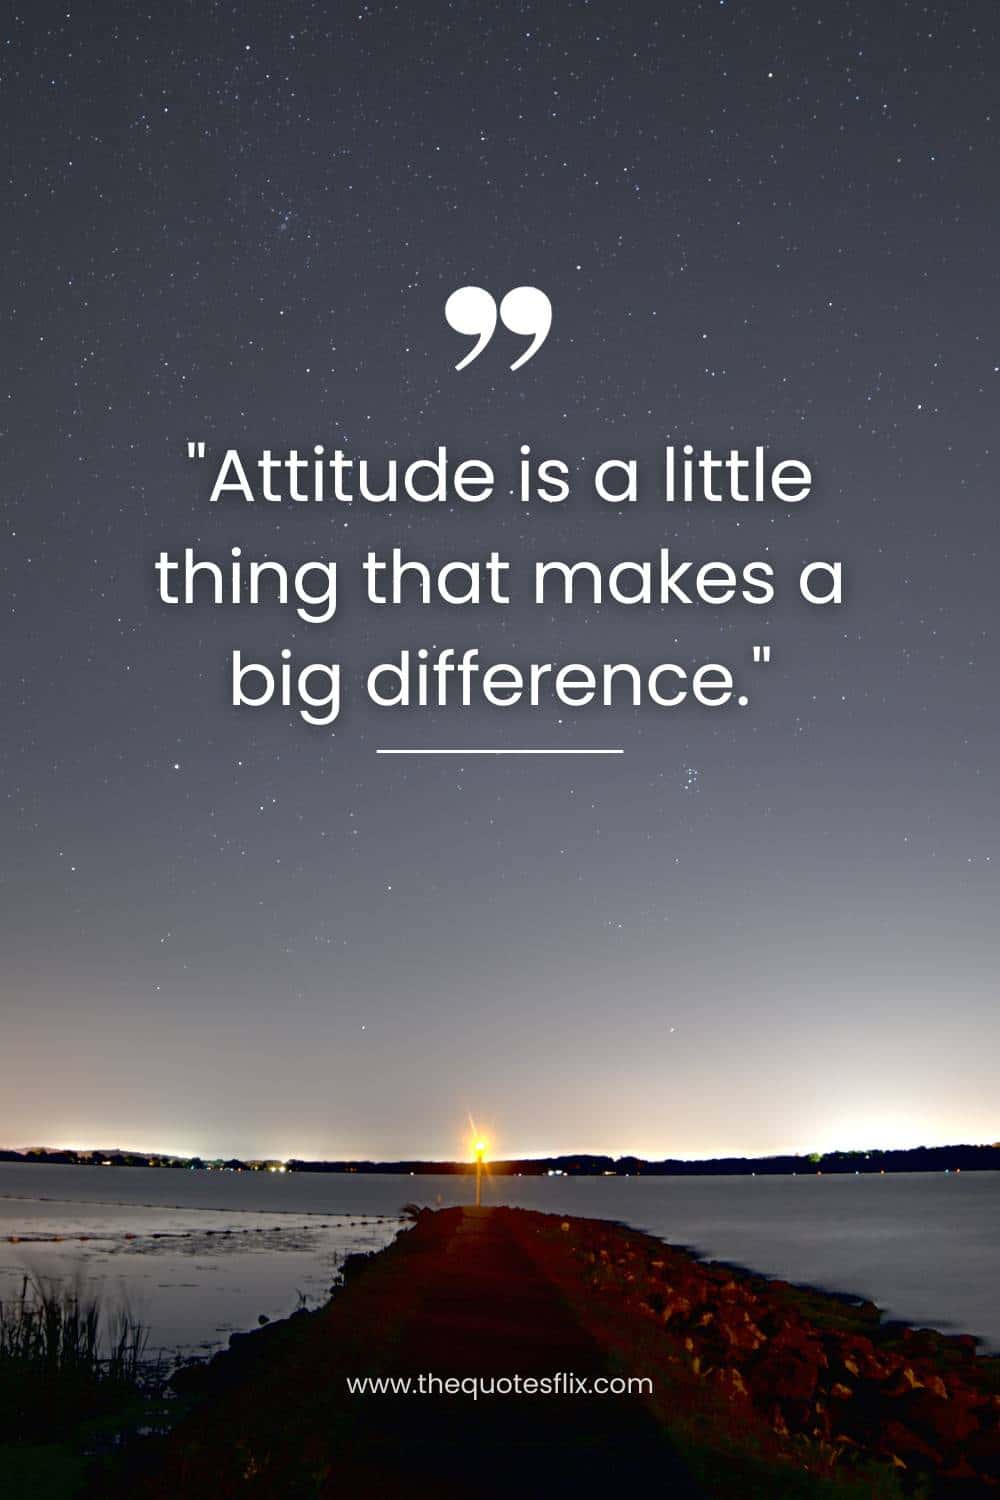 quotes for cancer survivor - attitude is thing makes big difference